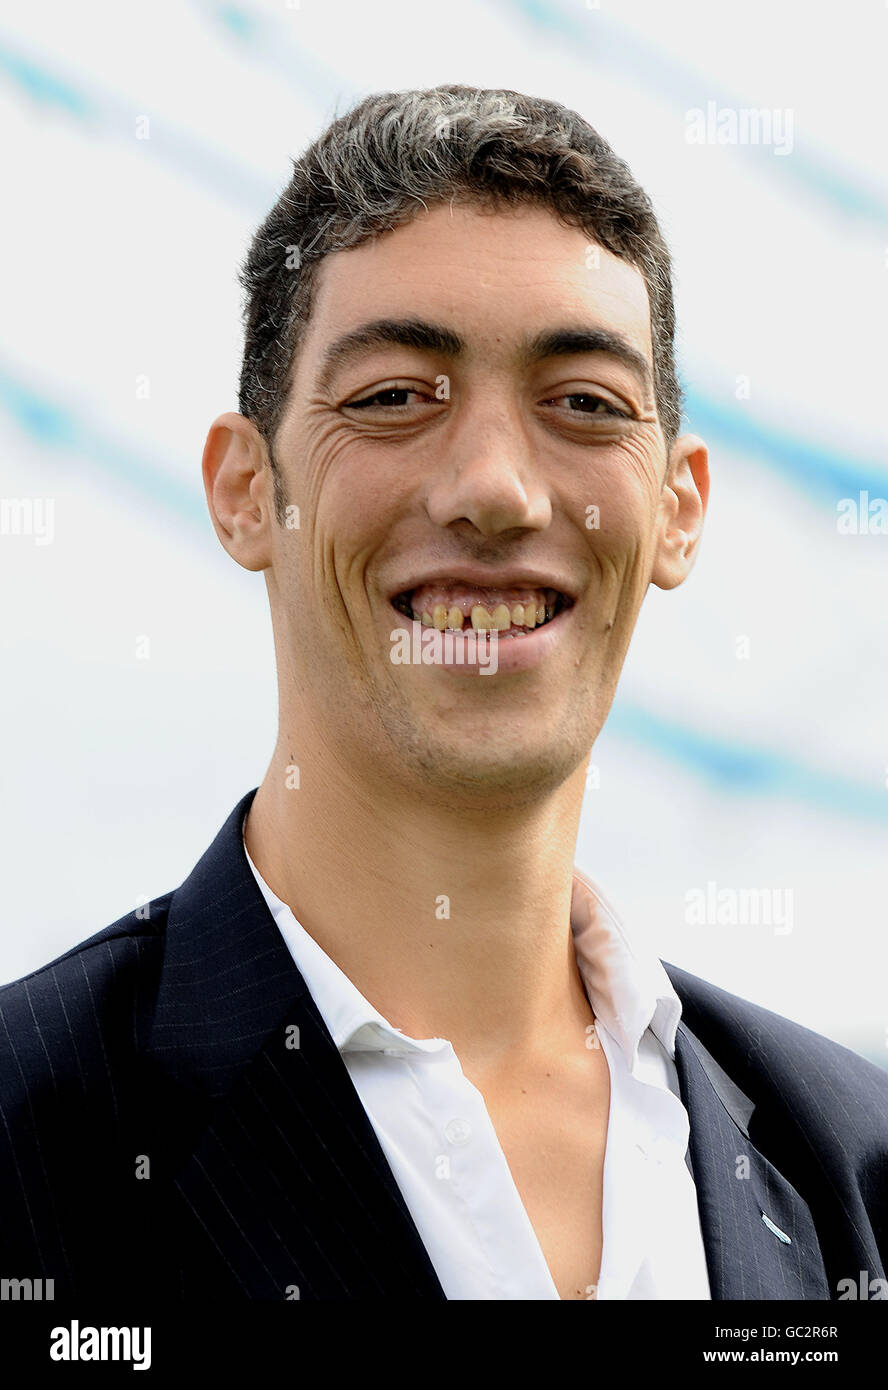 Sultan Kosen, from Turkey, is announced as the Guinness World Records Tallest Man standing at 8ft 1, seen in Potters Field in London. Stock Photo